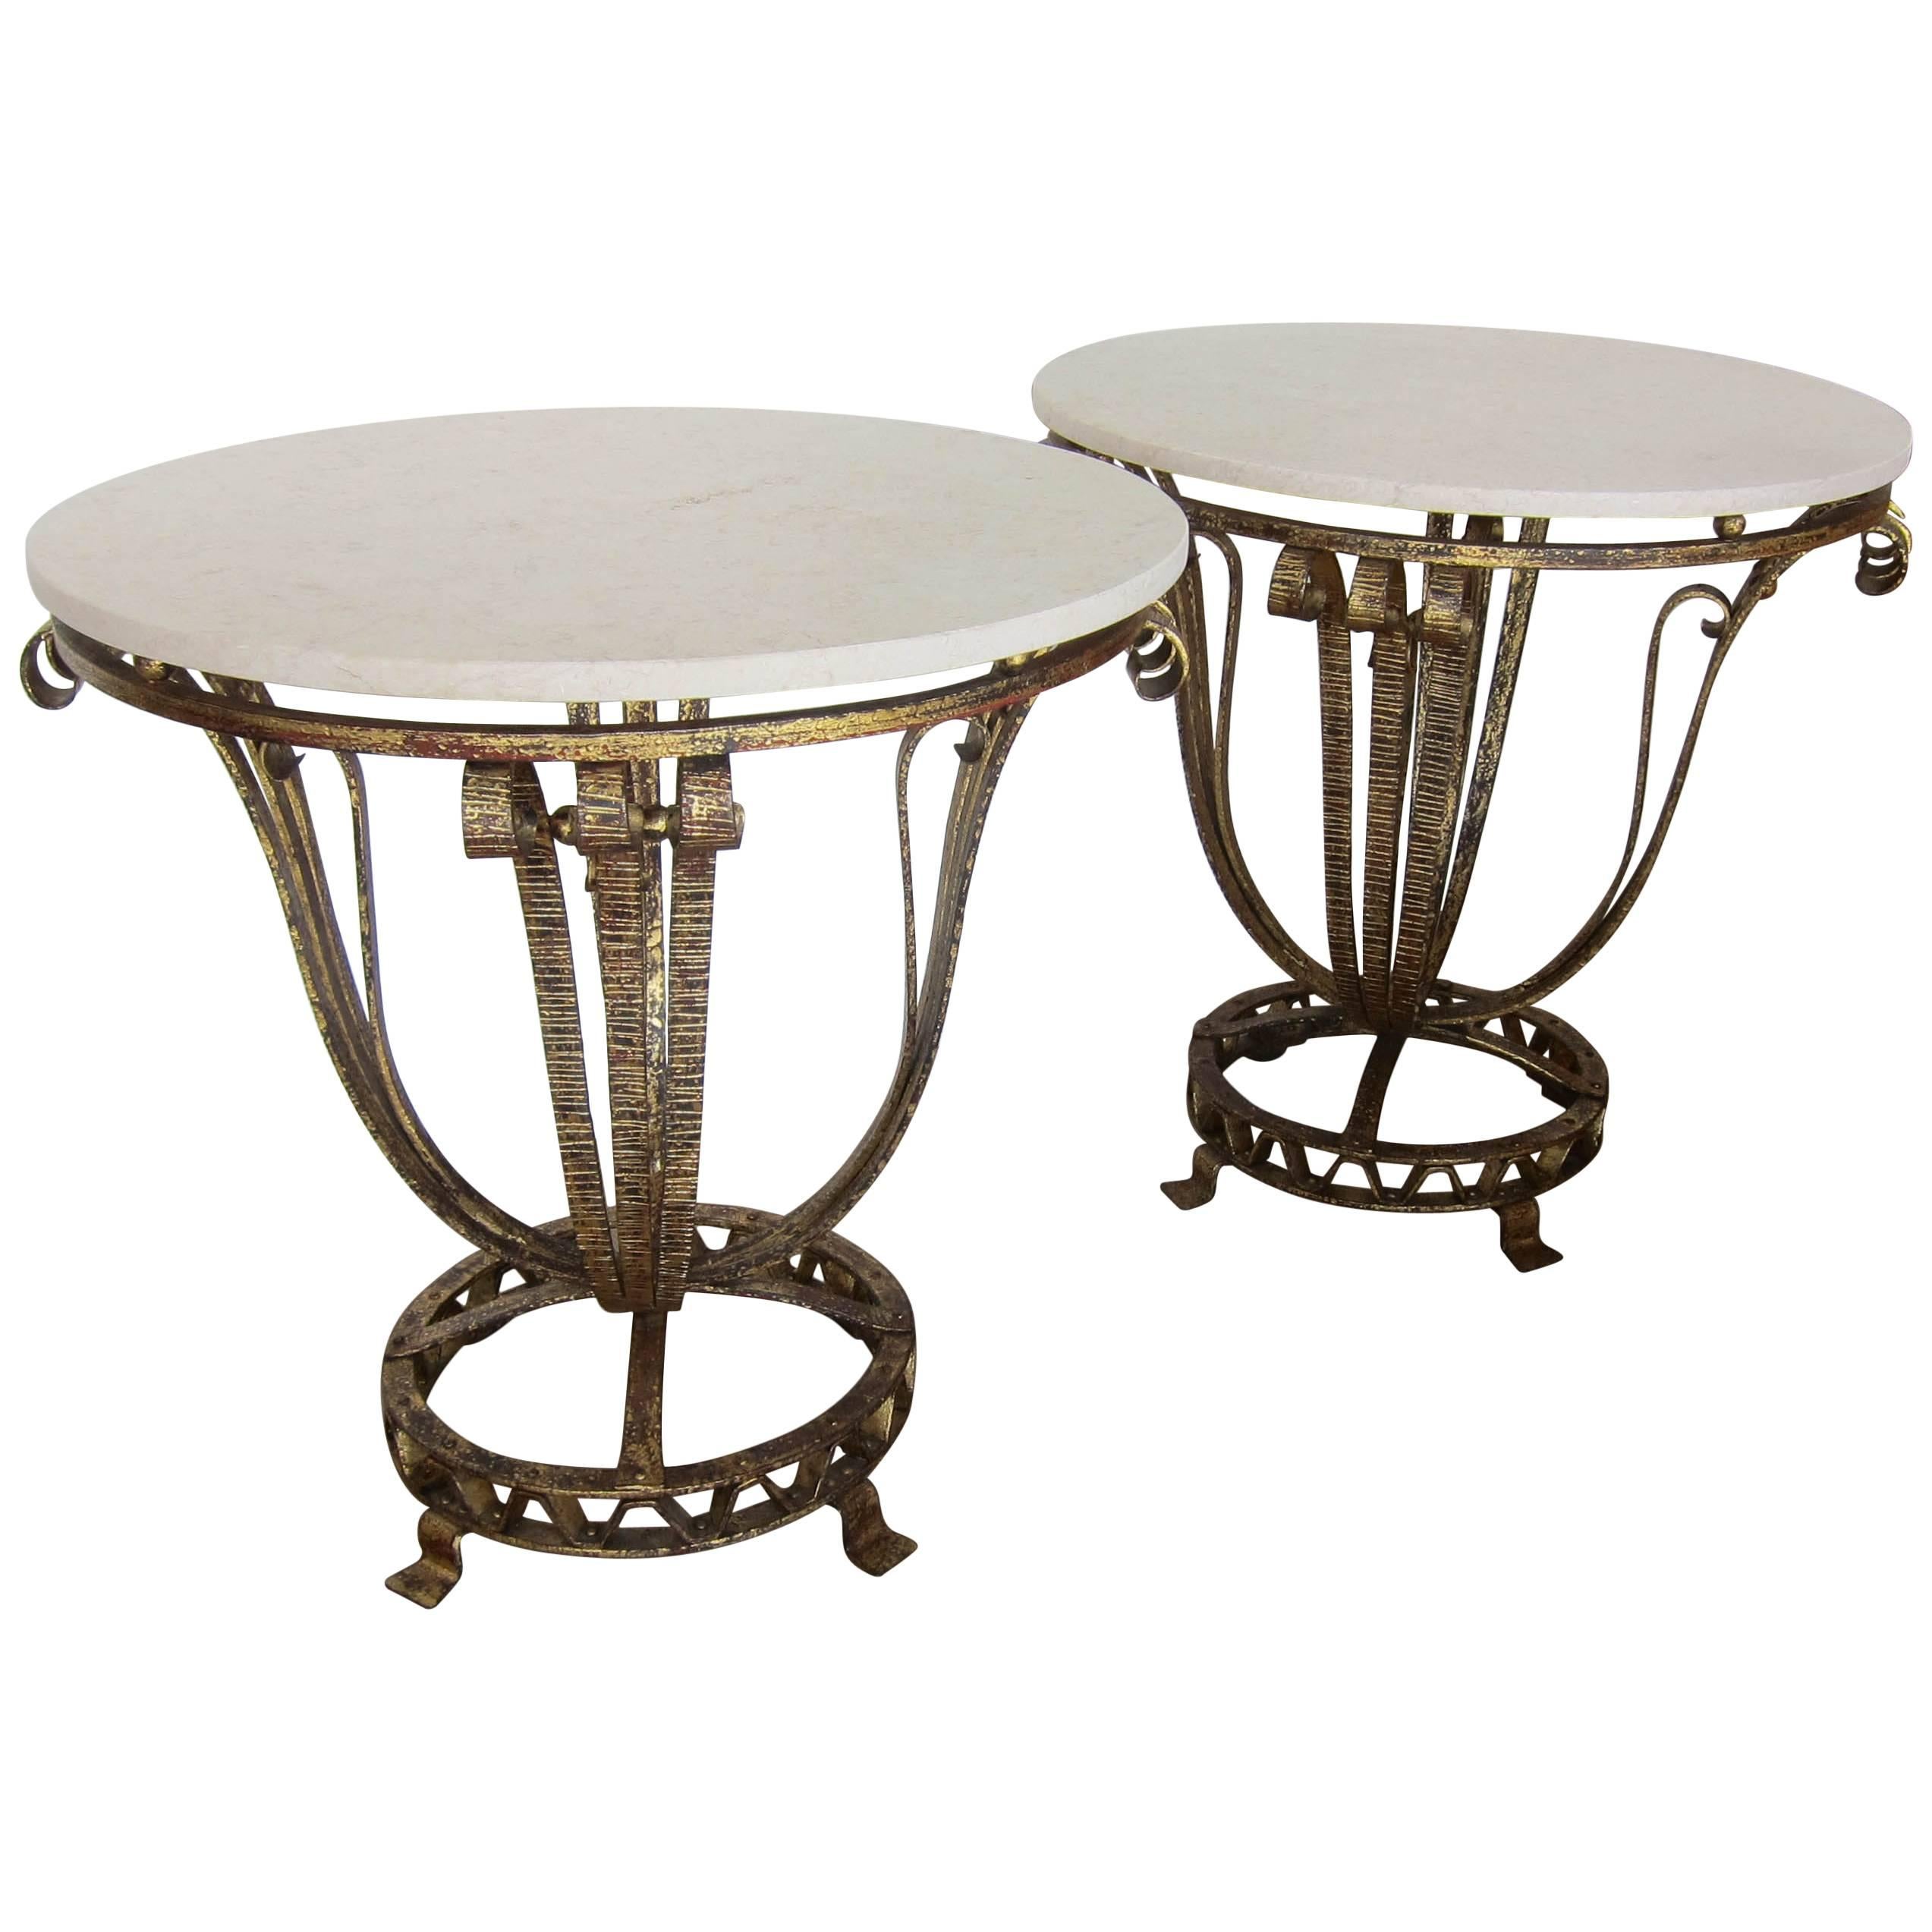 French Art Deco style Parcel-Gilt Iron End Tables